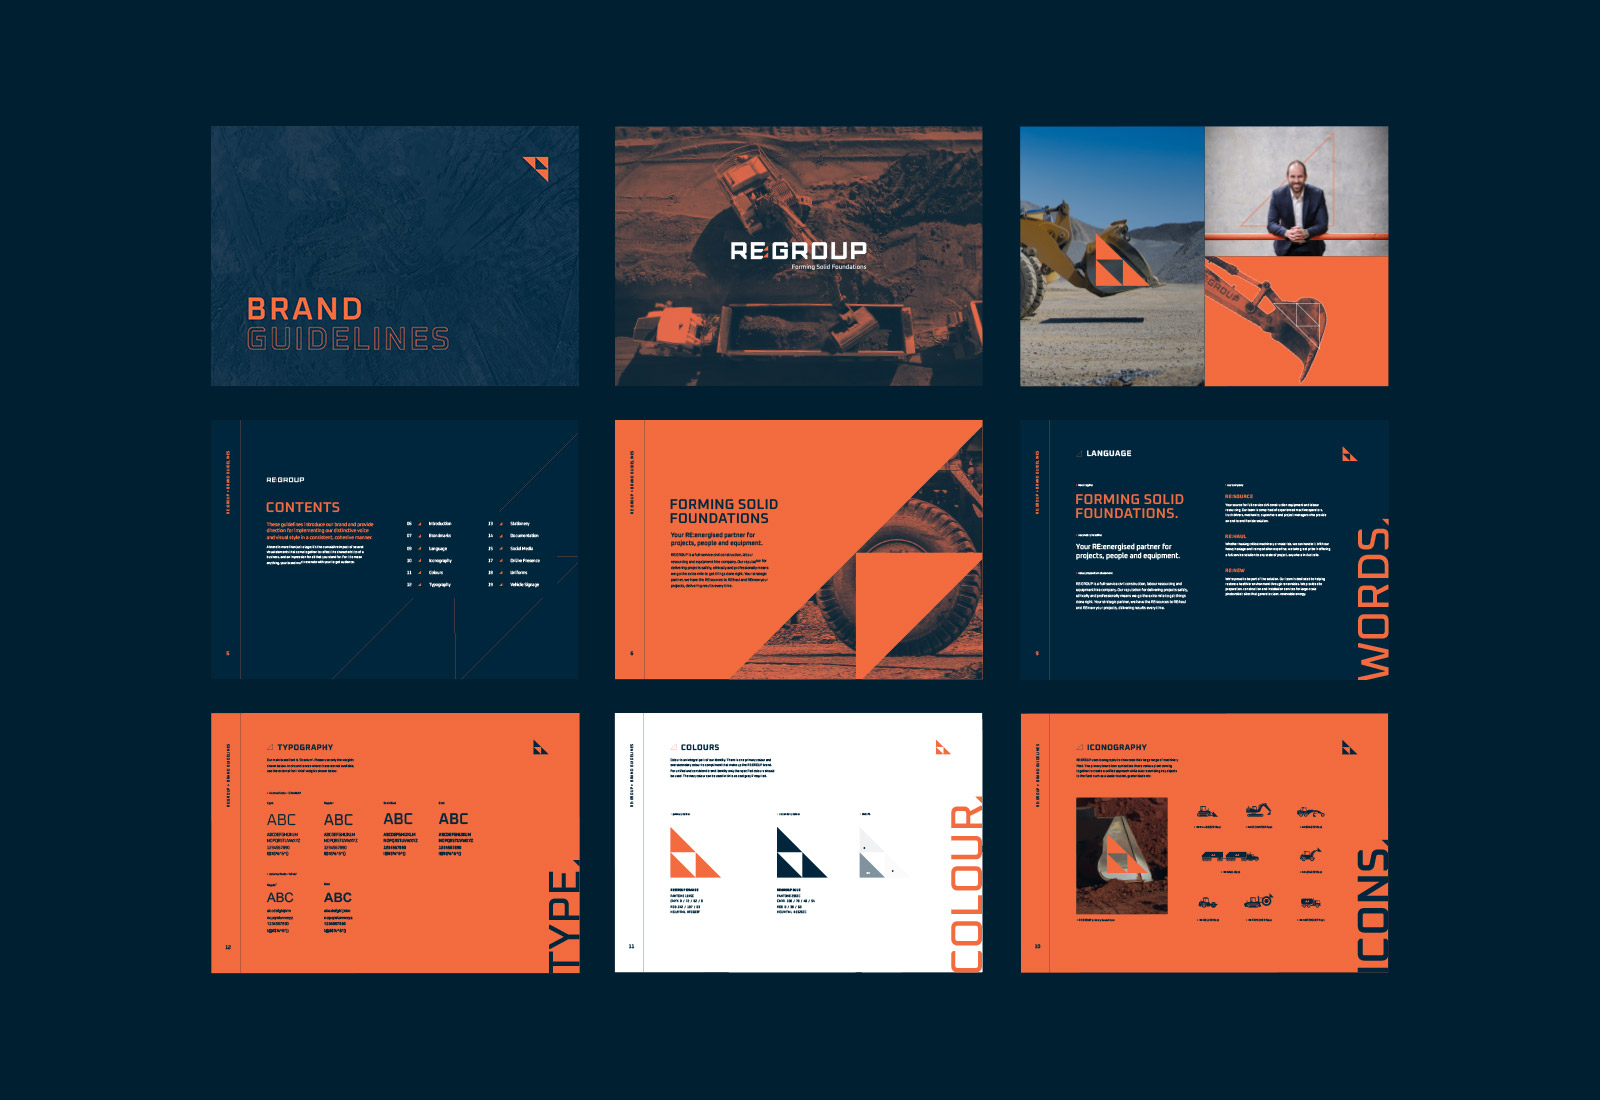 REGROUP brand guidelines showcasing typography and logo design